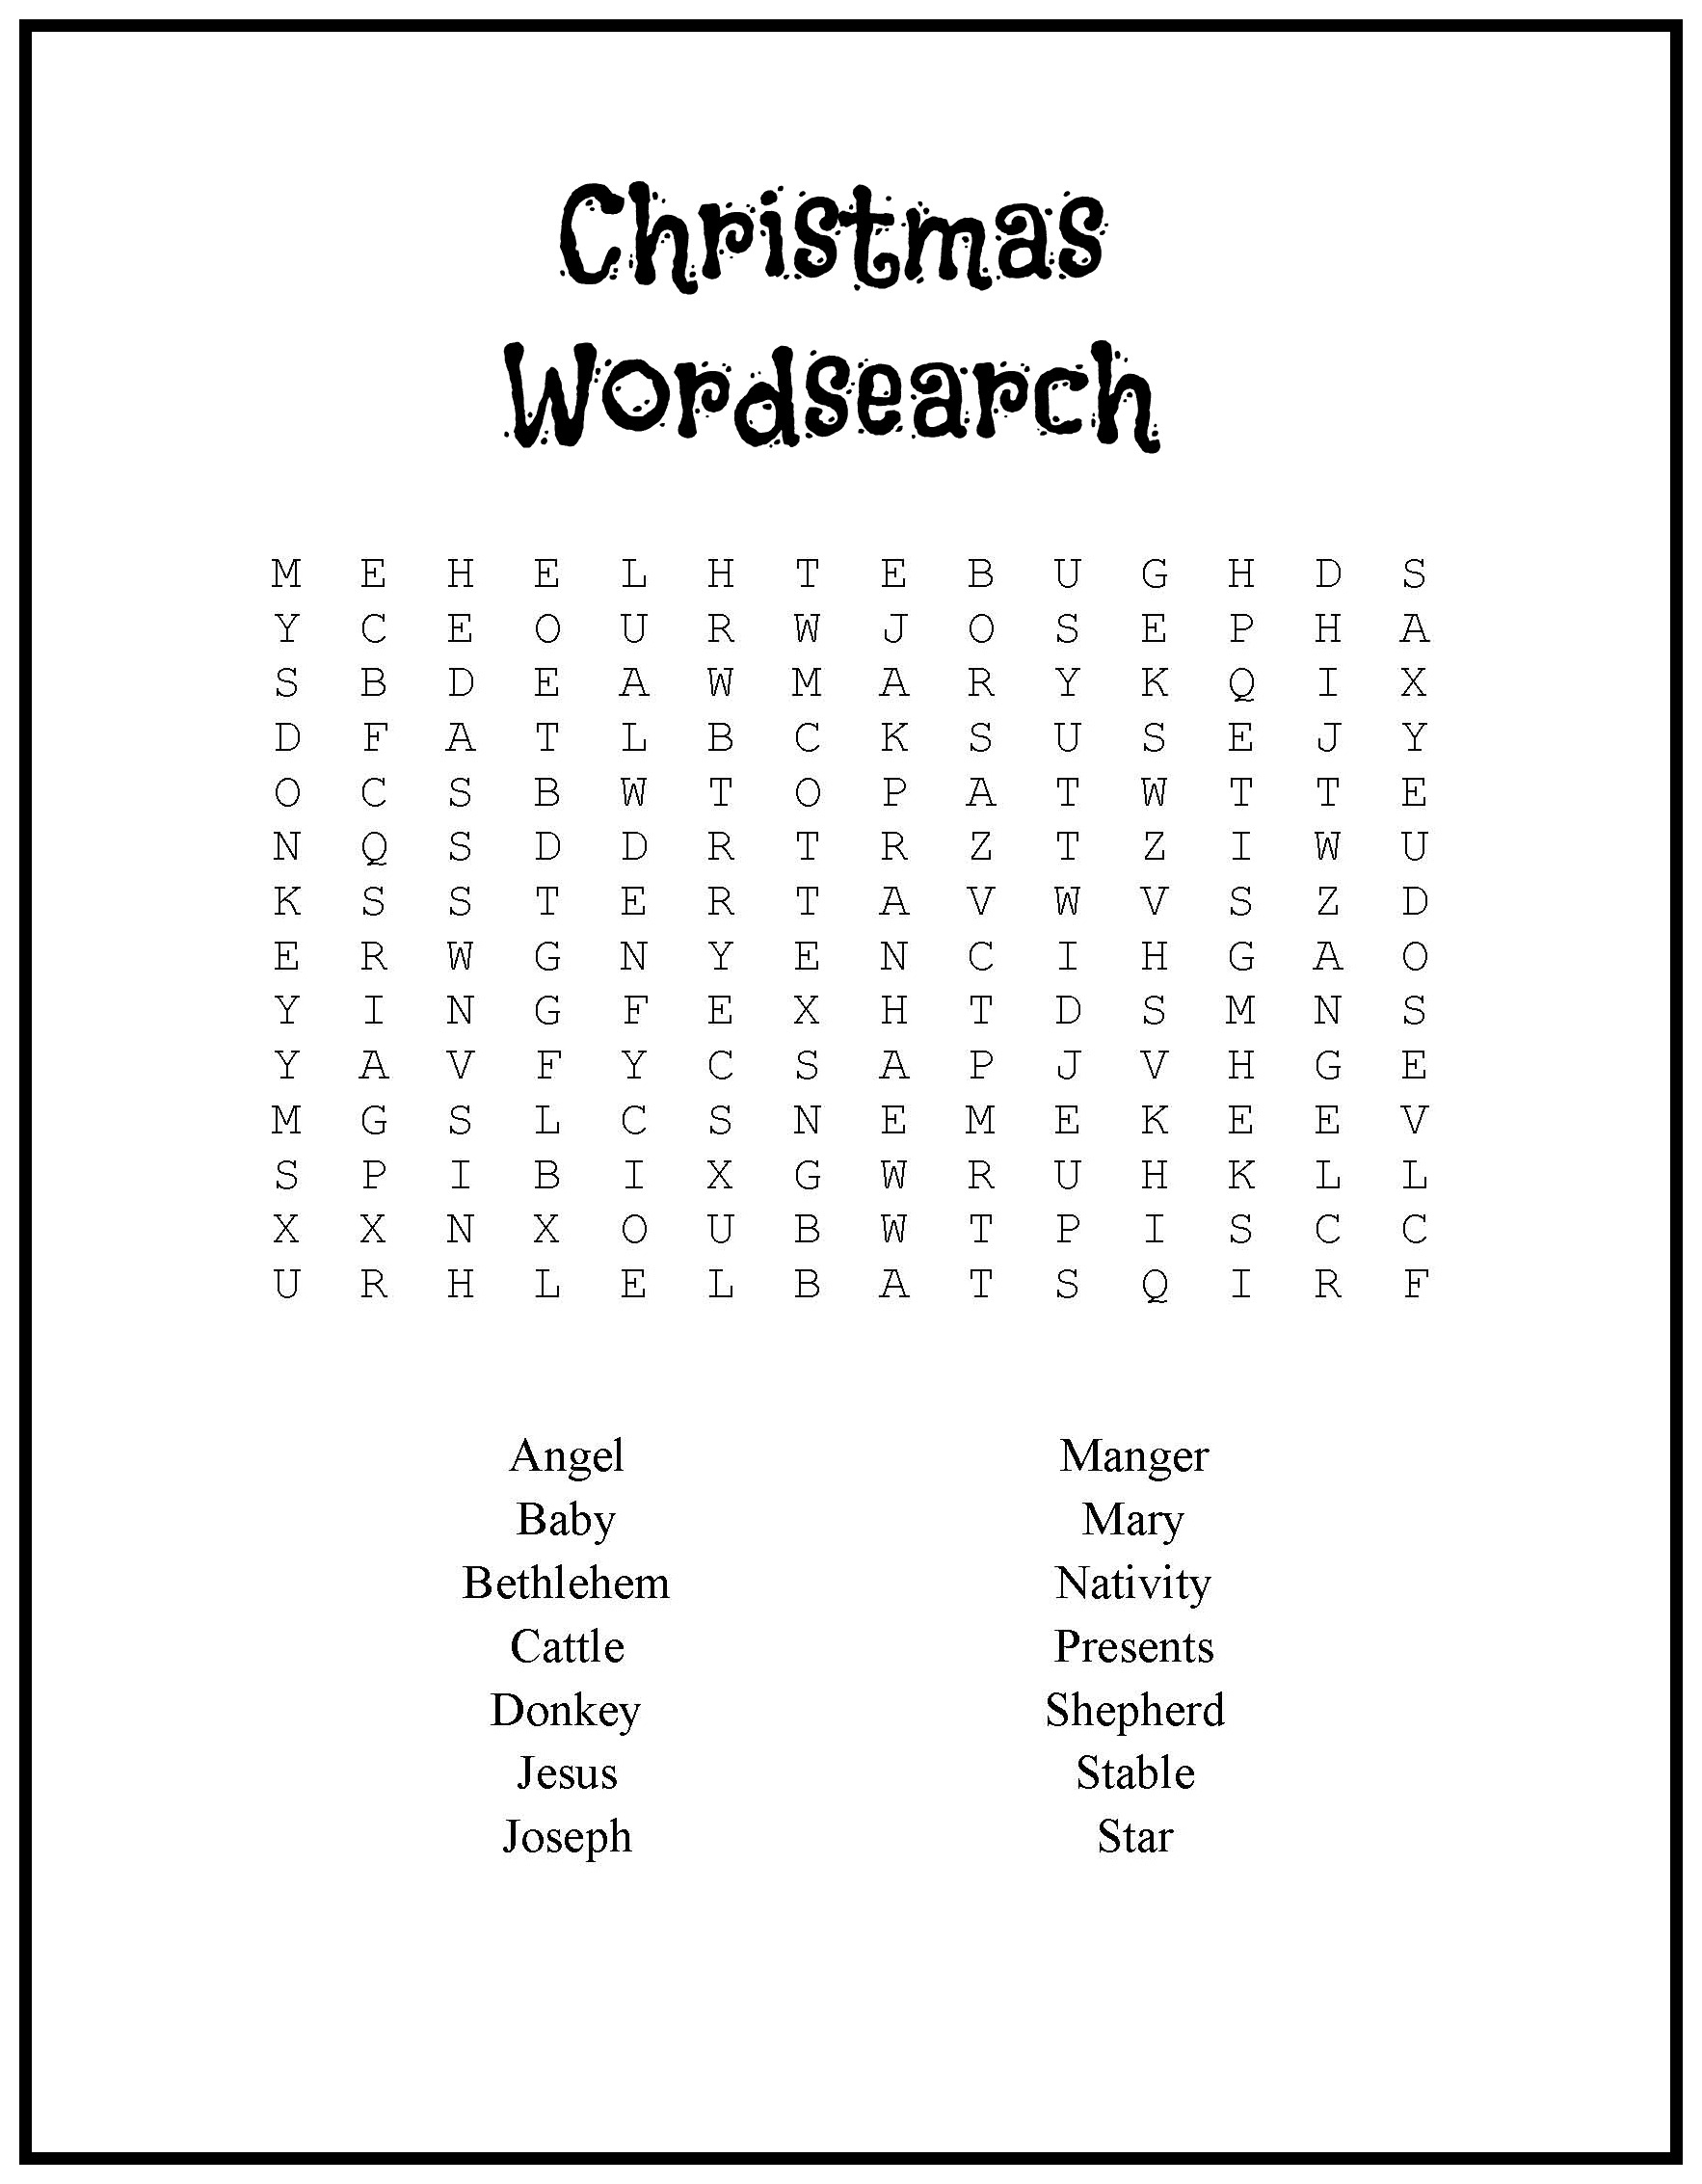 Wscrc37 | Hd++ | Free Word Search Christmas Religious